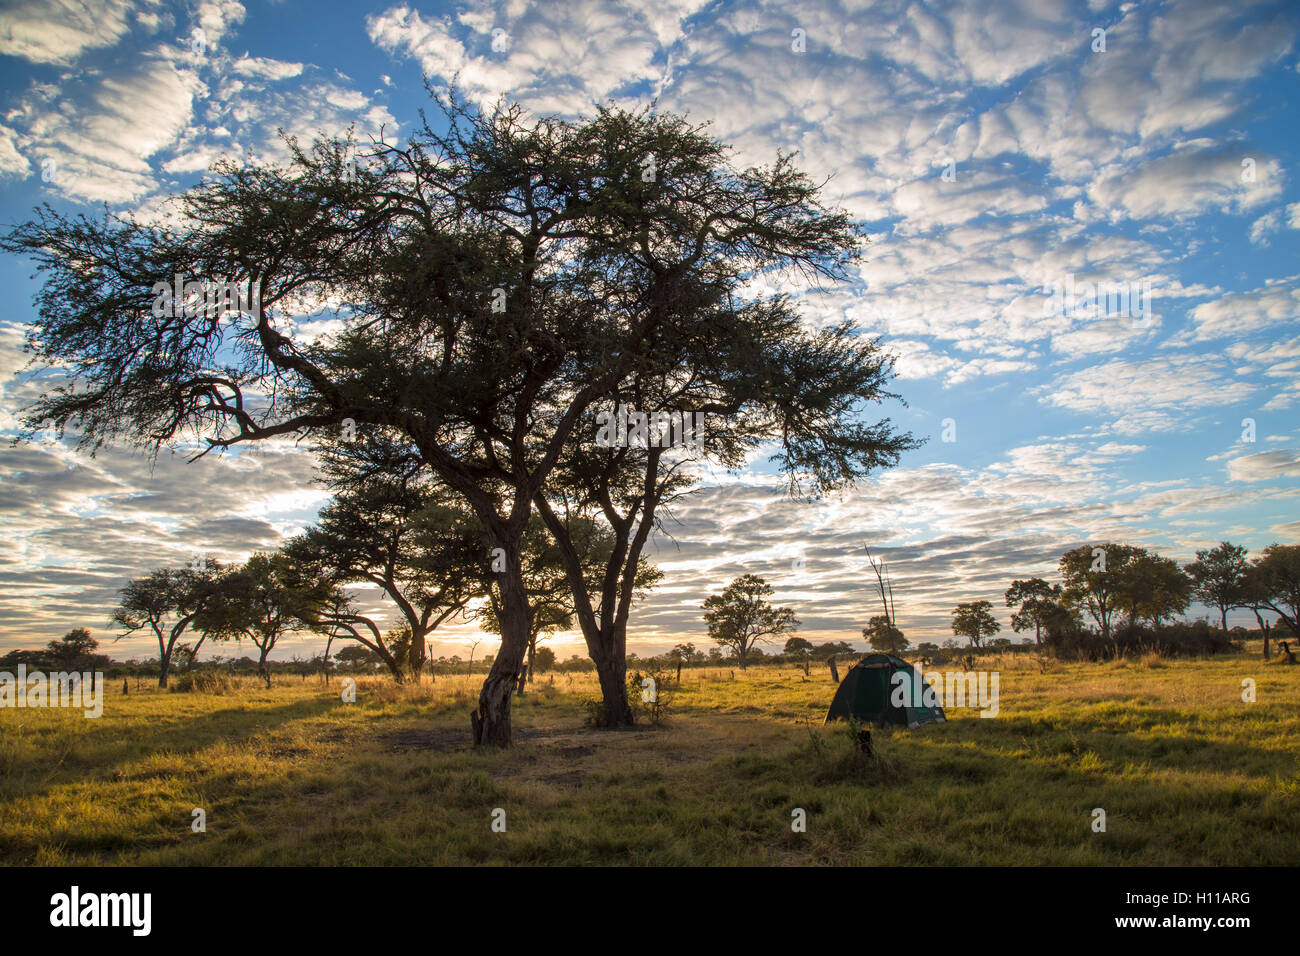 Scenic view of a bow tent under a shady tree at one of the Khwai Riiver community camp sites in Moremi Stock Photo